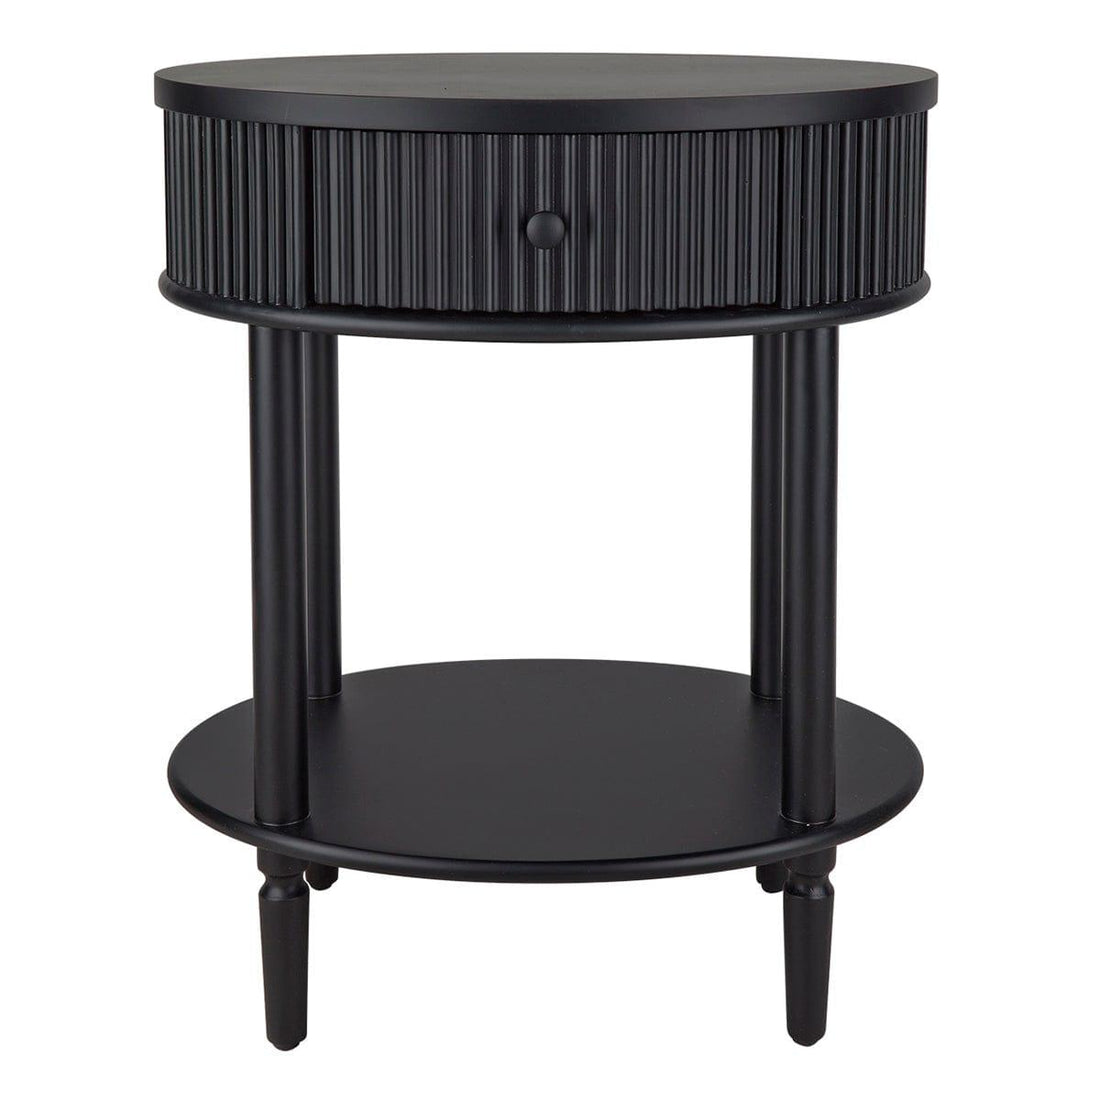 House Journey Arielle Oval Bedside Table - Black